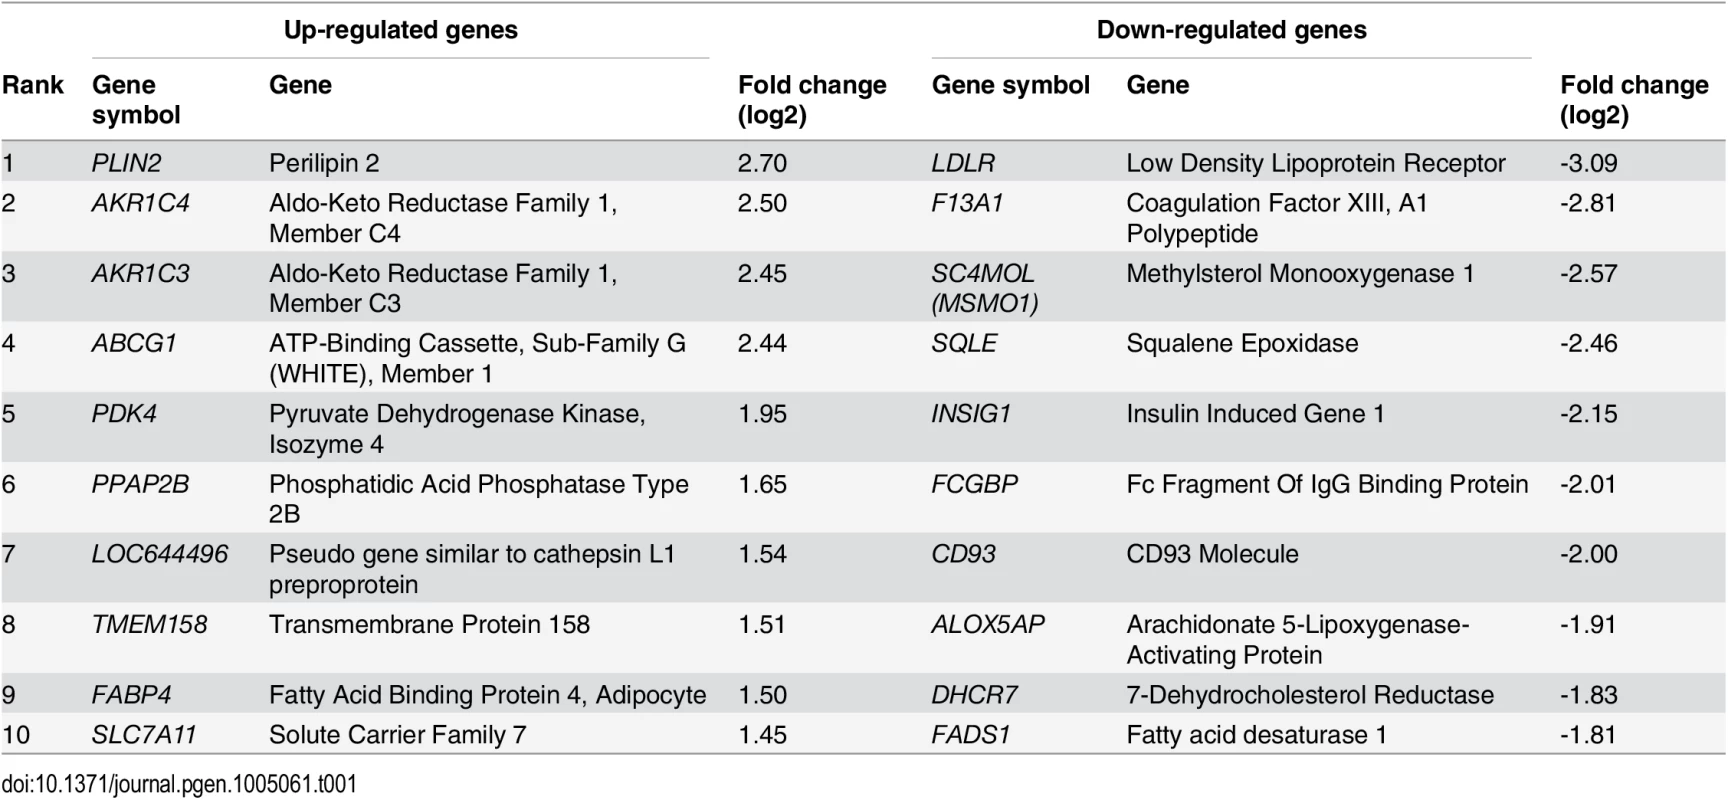 Top 10 most up-regulated and down-regulated genes during oxLDL-induced foam cell formation.